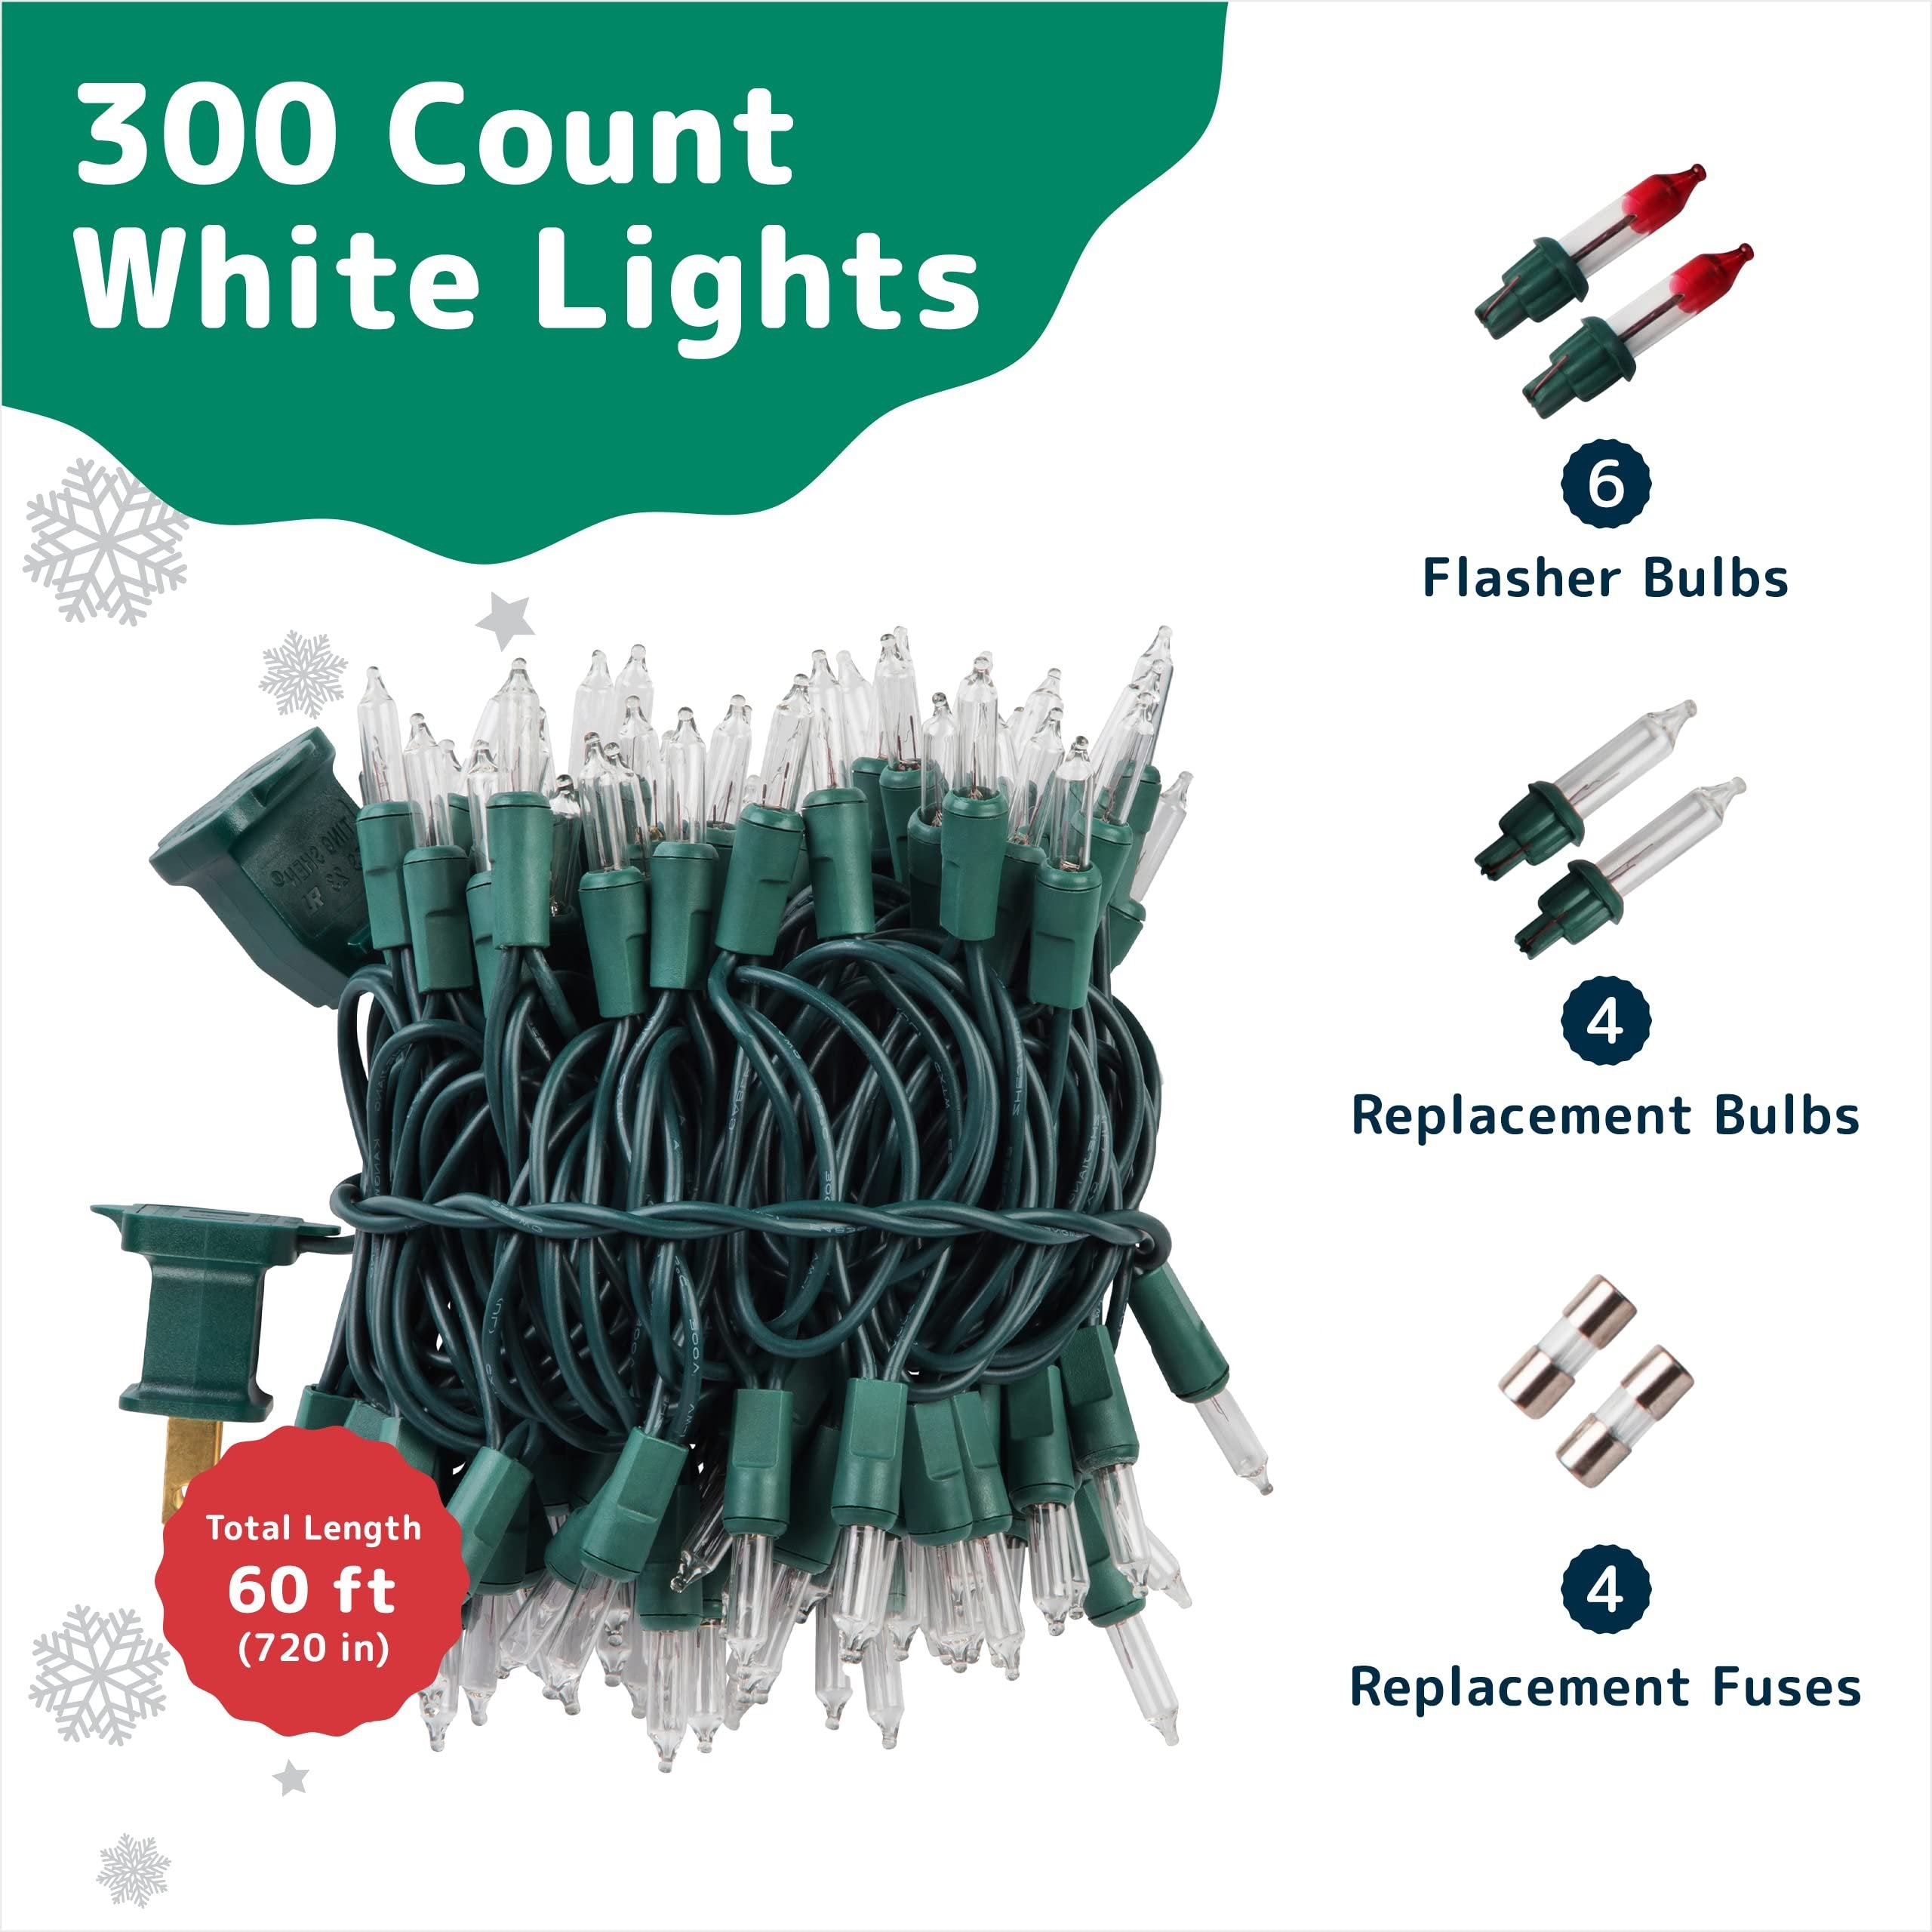 PREXTEX Christmas Lights (60 Feet, 300 Lights) - Clear White Christmas Tree Lights with Green Wire - Indoor/Outdoor String Lights - Warm White Twinkle Lights